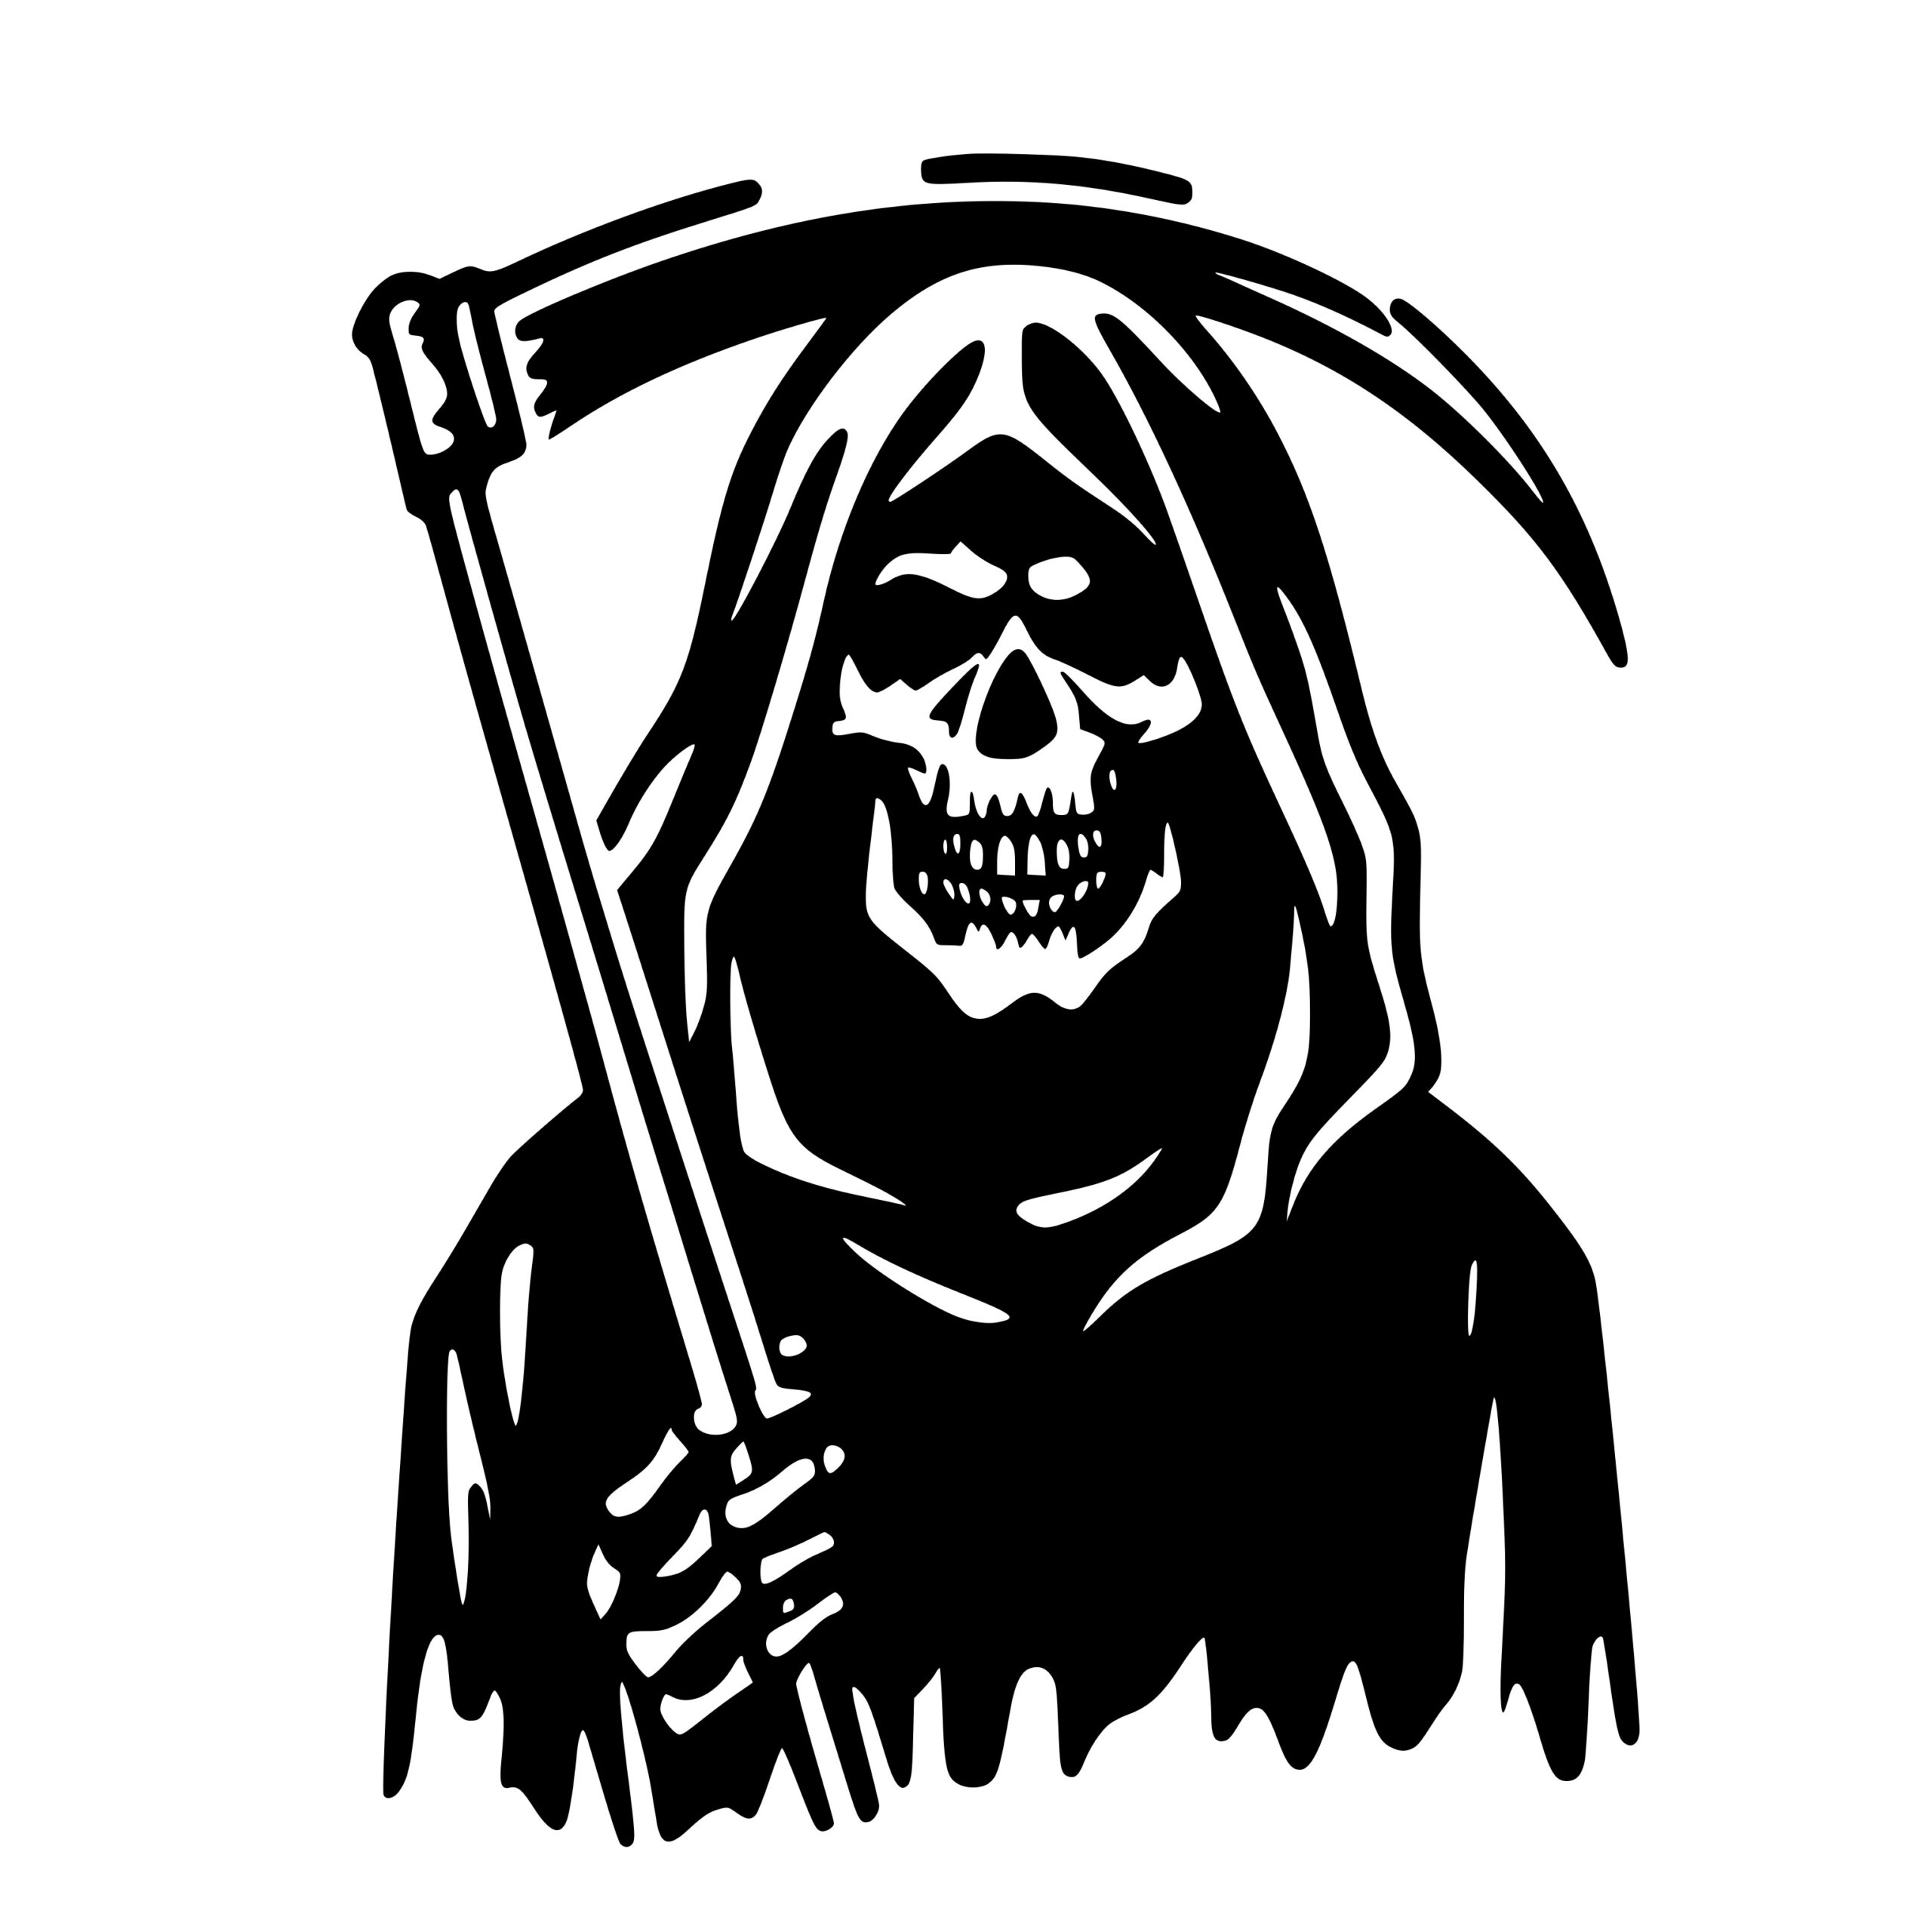 Mysterious Grim Reaper SVG File for Cricut, Silhouette, and Laser Machines